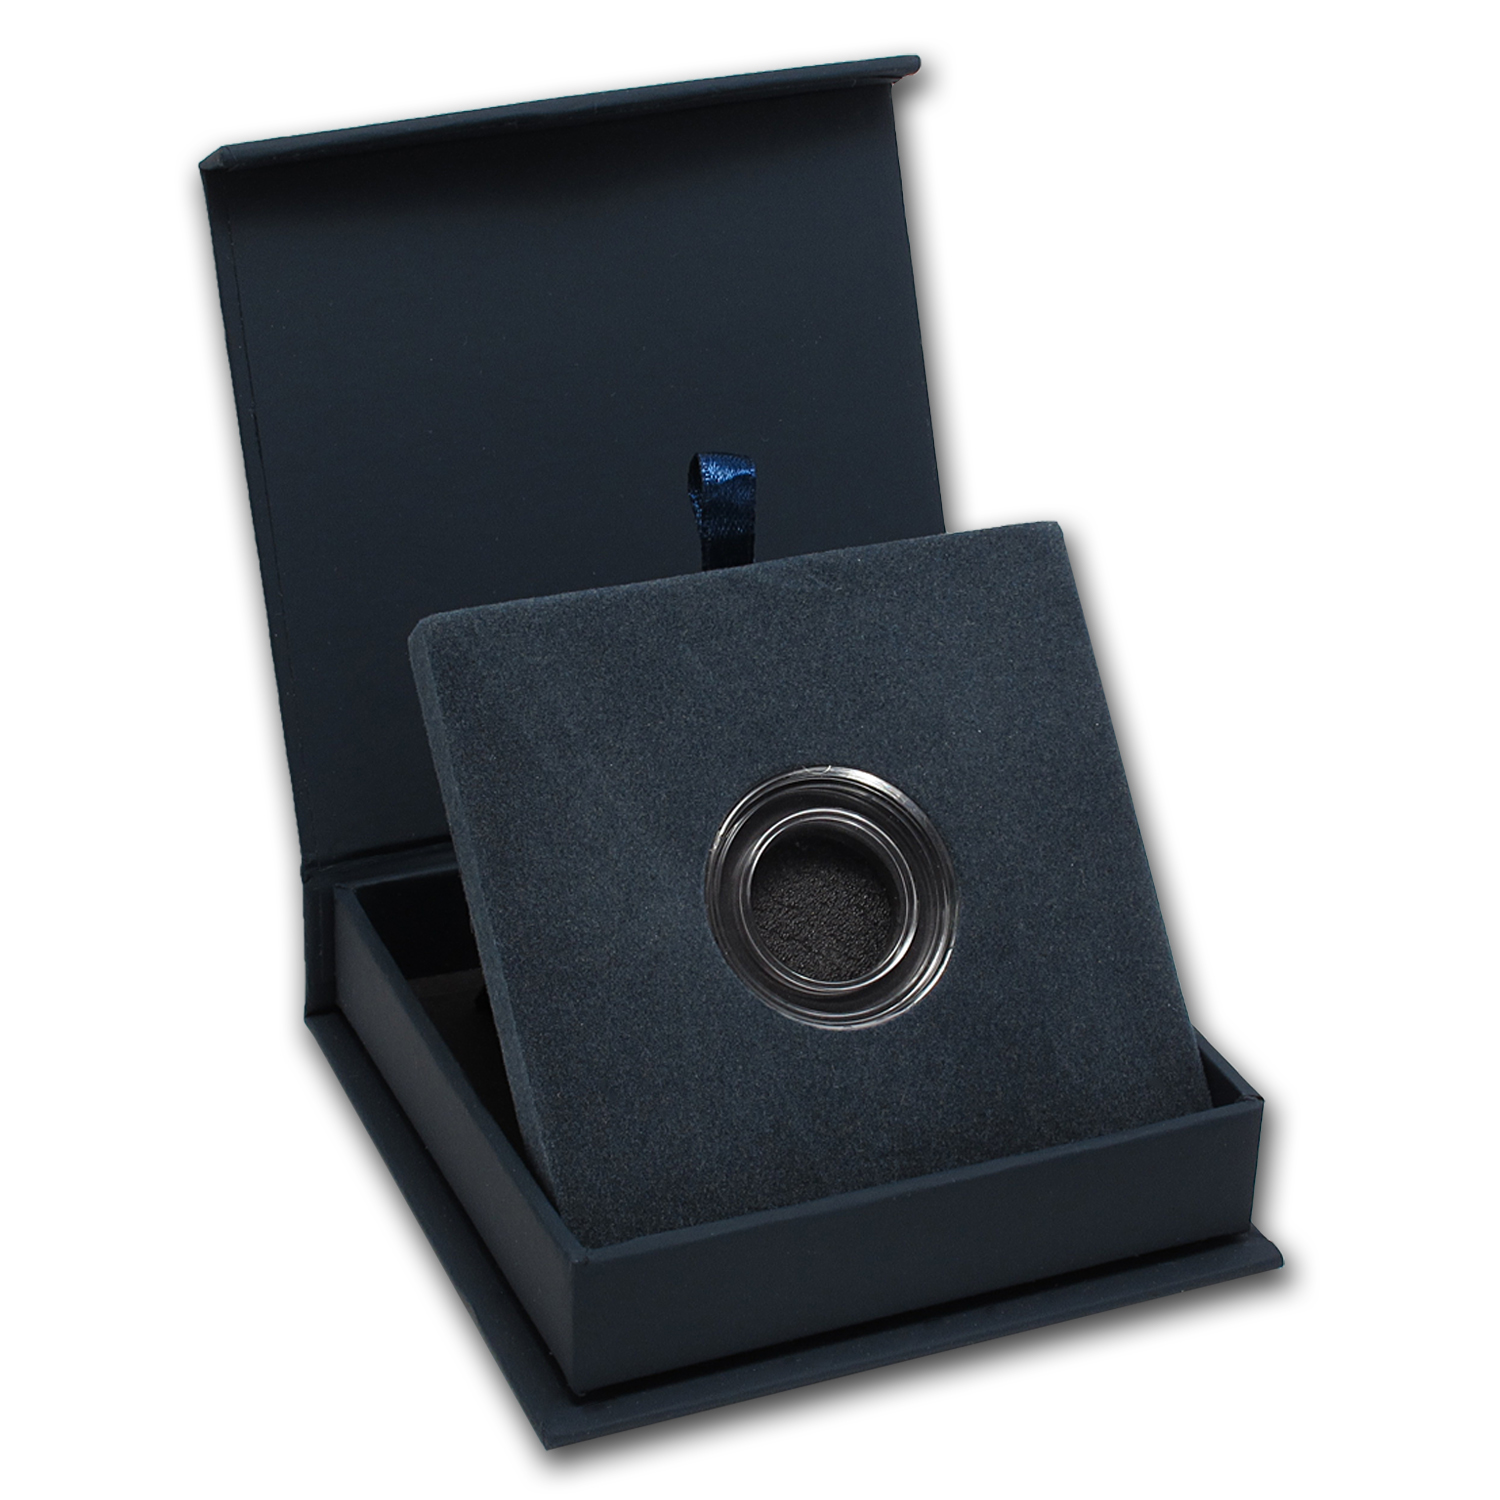 Buy APMEX Gift Box - Includes 19 mm Direct Fit Air-Tite Holder